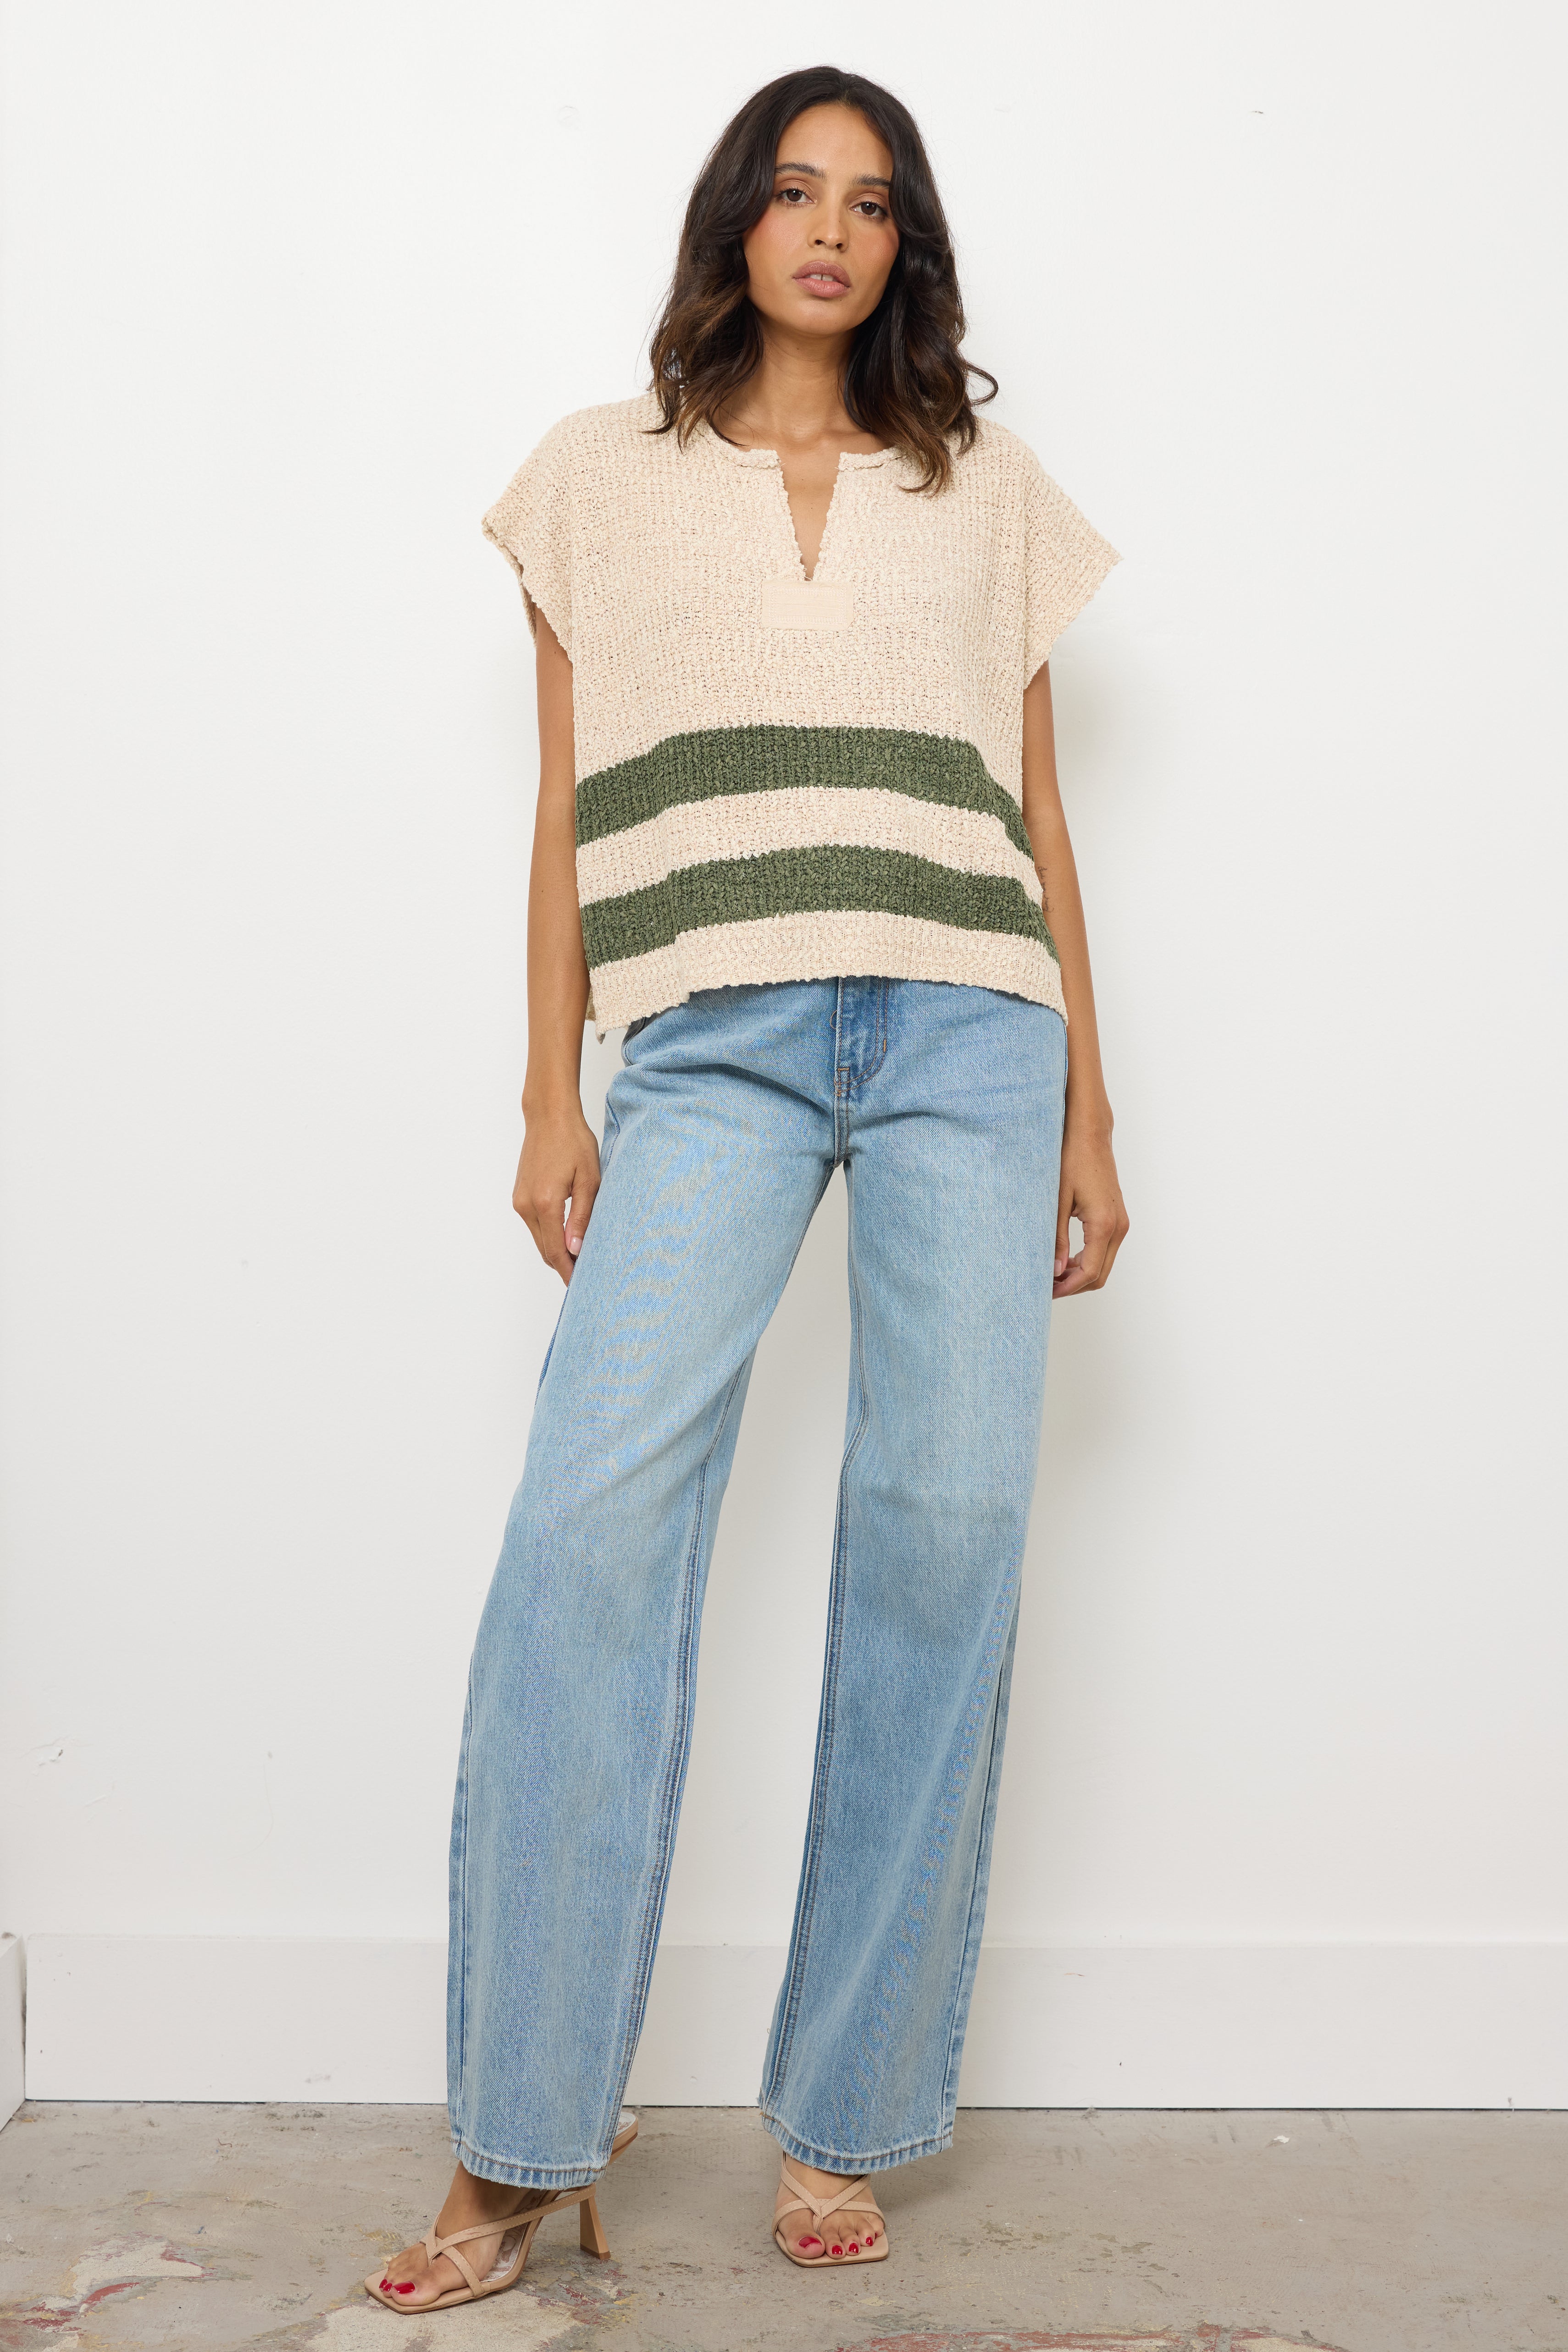 Springfield Olive Knit Top